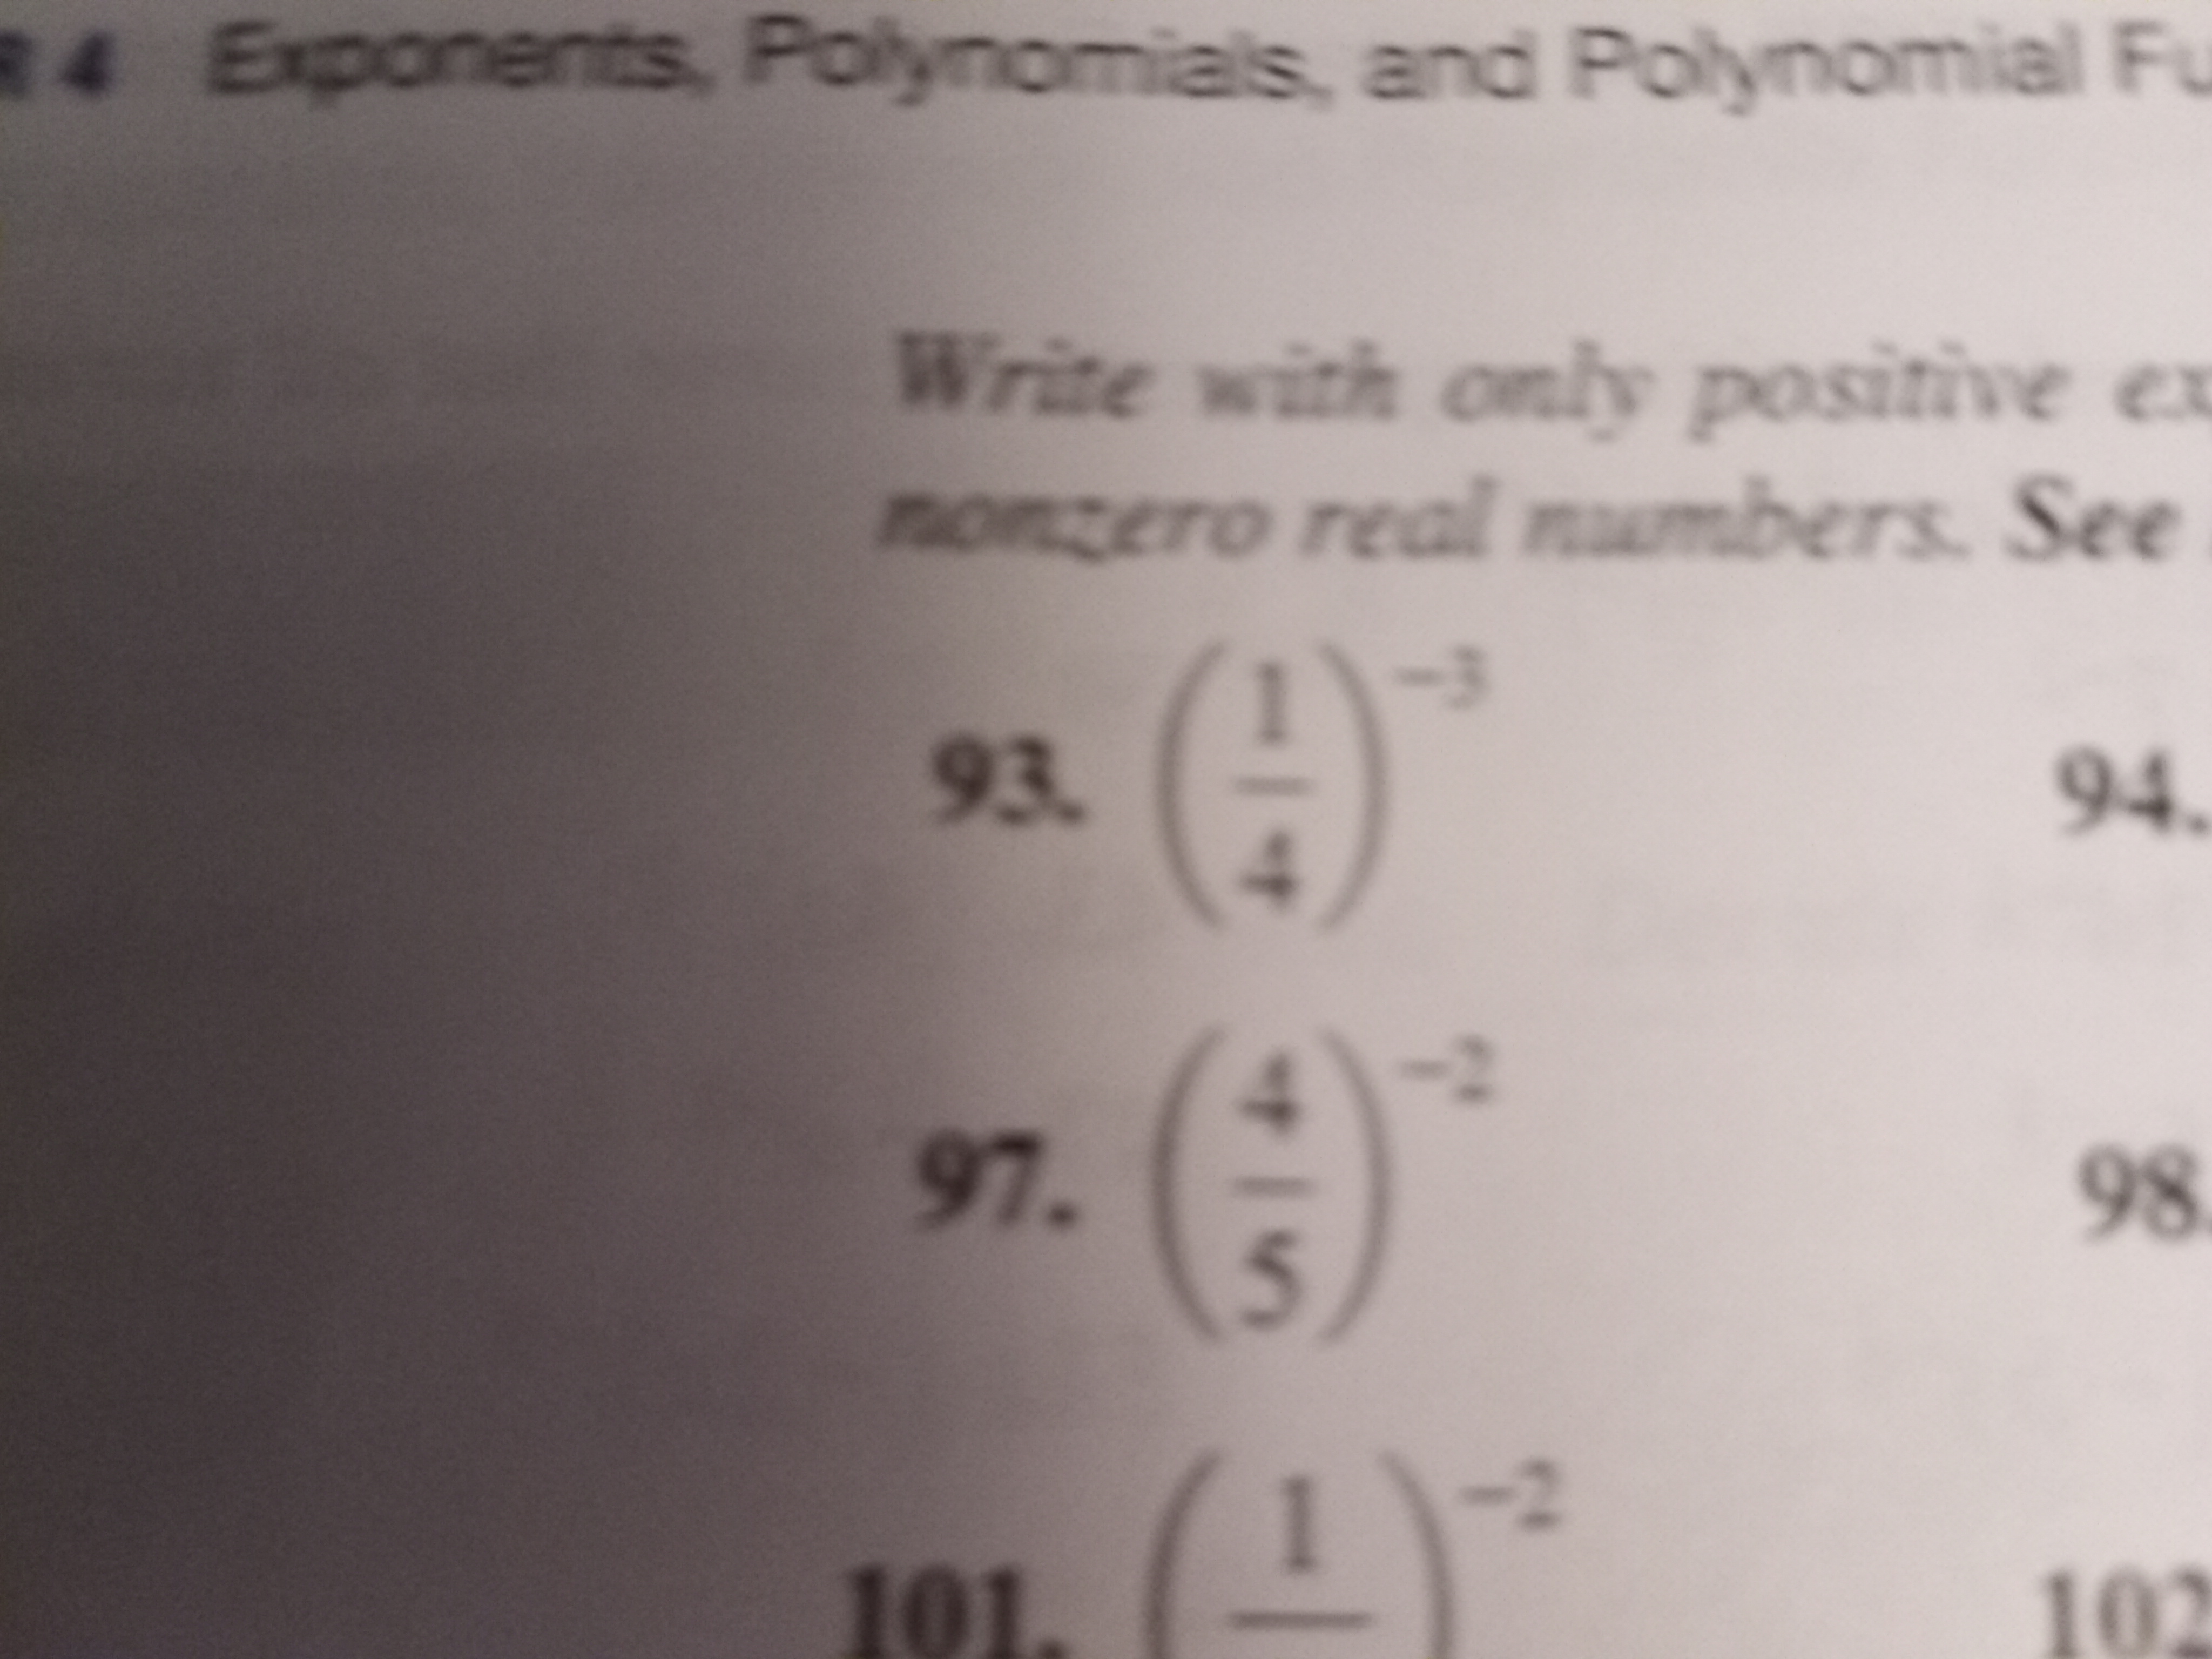 4
lynomials, and Polynomial Fu
Exponents. Po
Write with only positive ex
nonzero real numbers. See
-3
93.
94.
97
98
(1)
101
102
